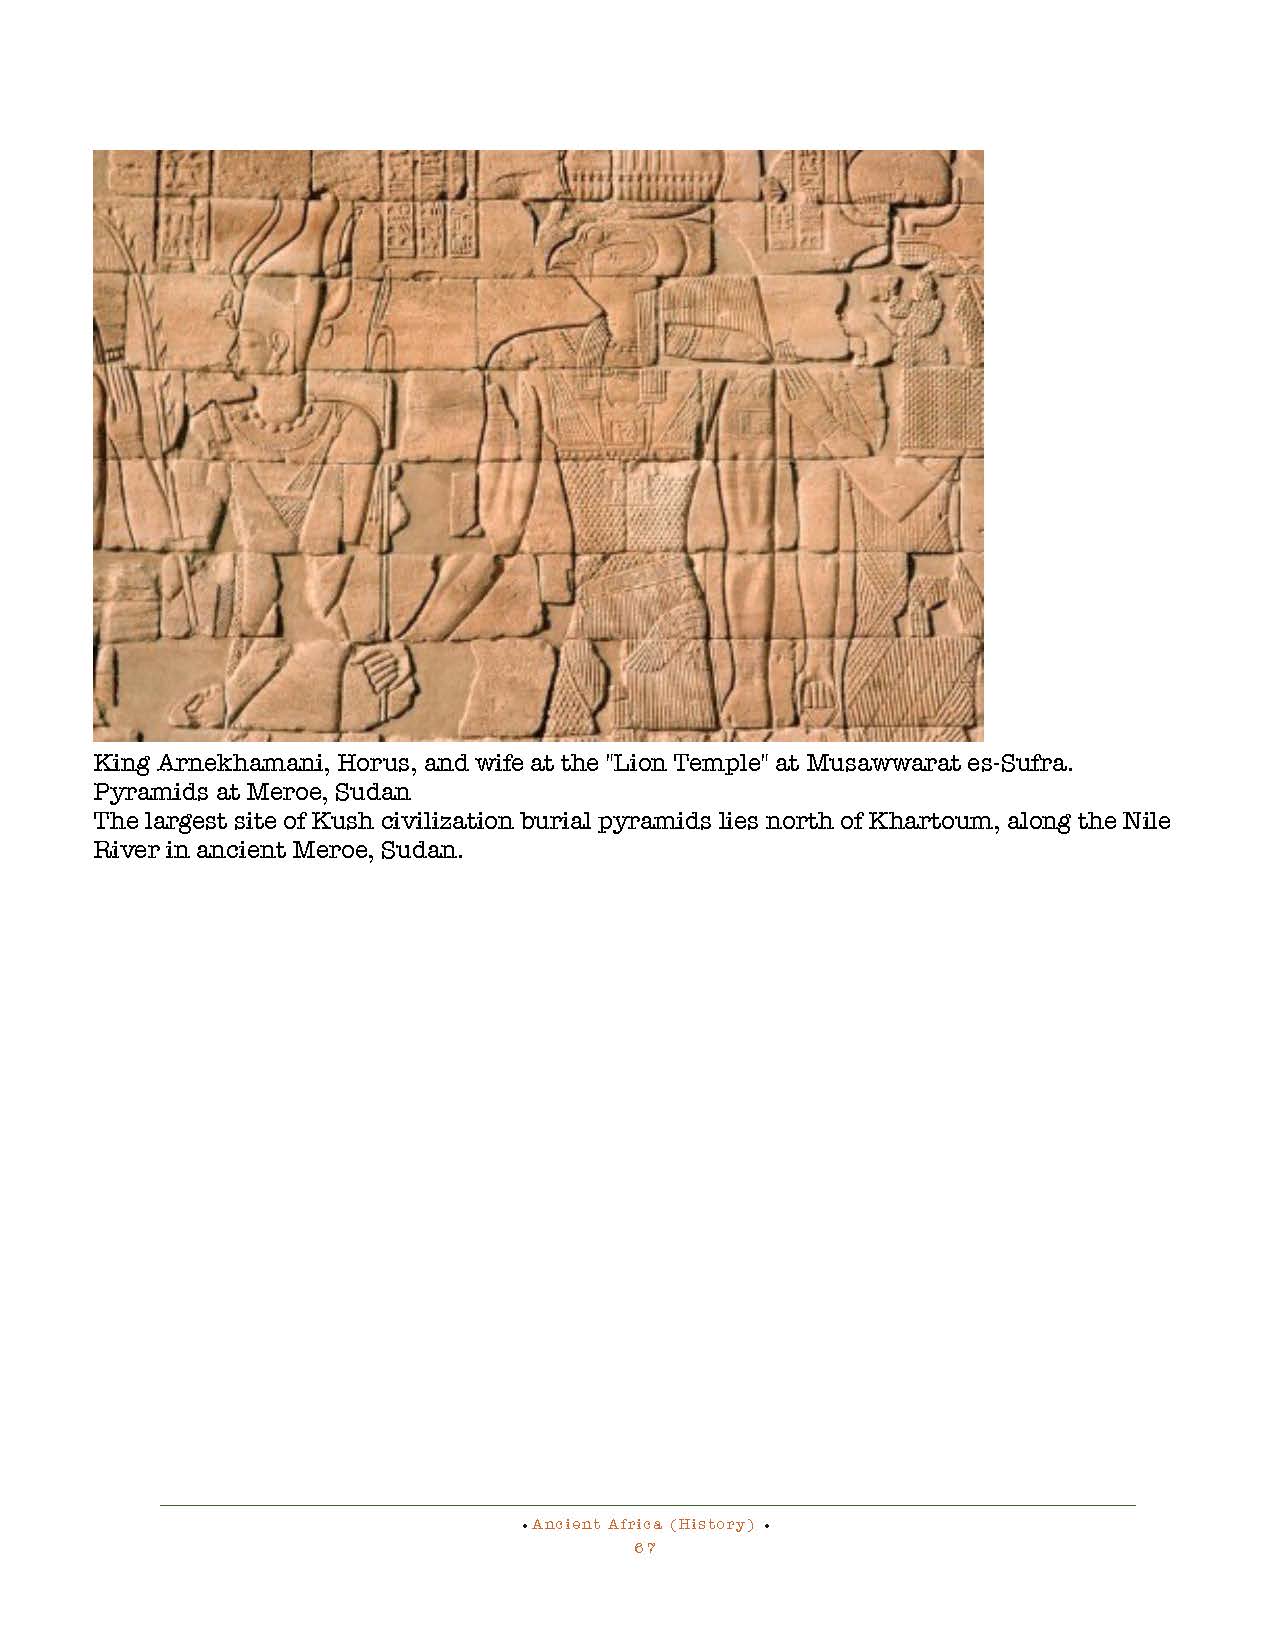 HOCE- Ancient Africa Notes_Page_067.jpg